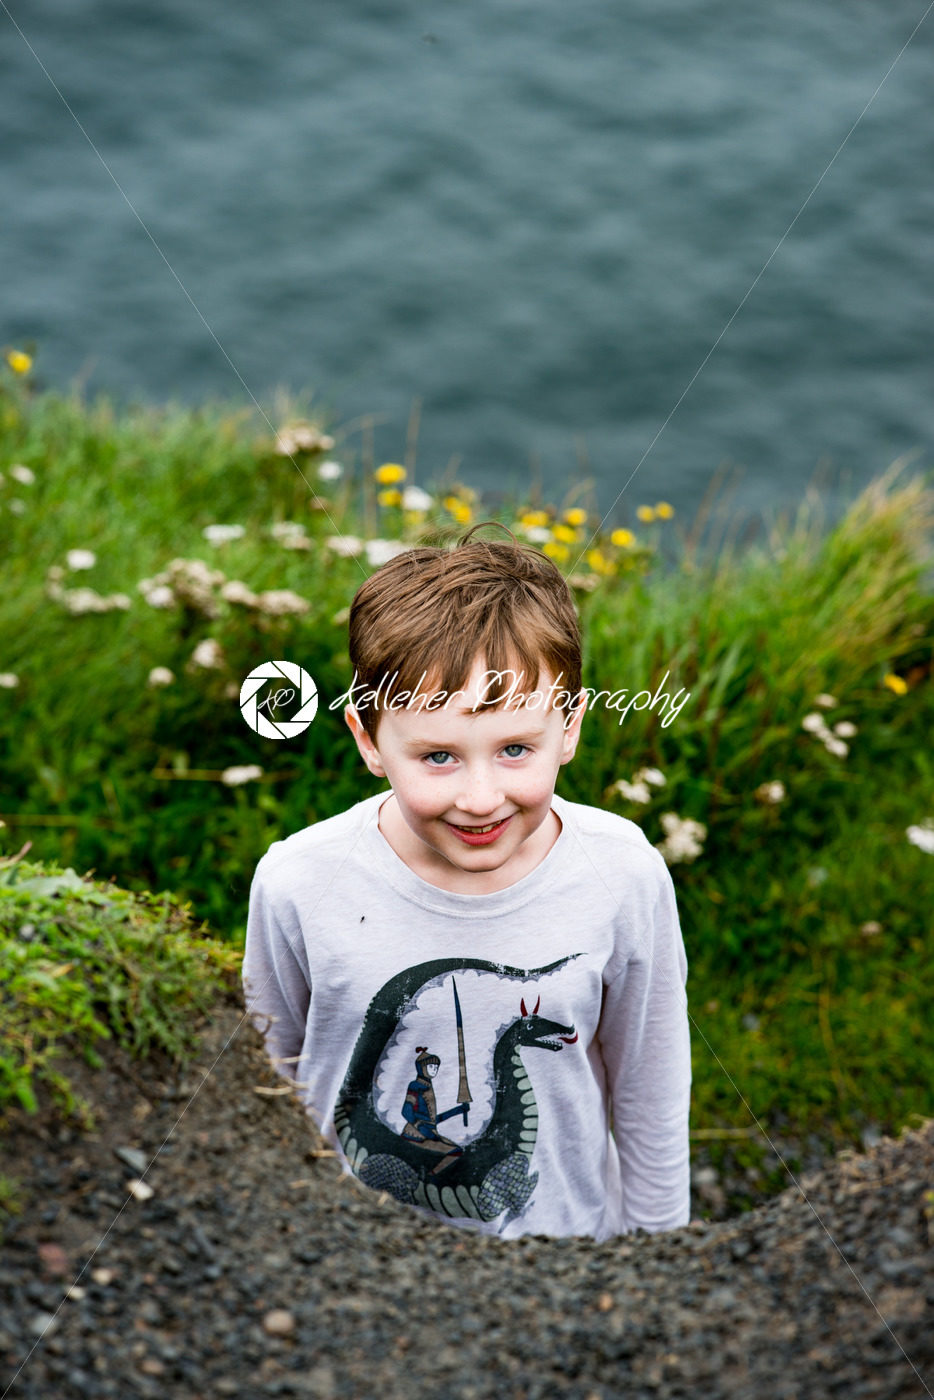 Boy looking up the Cliffs of Moher Tourist Attraction in Ireland - Kelleher Photography Store